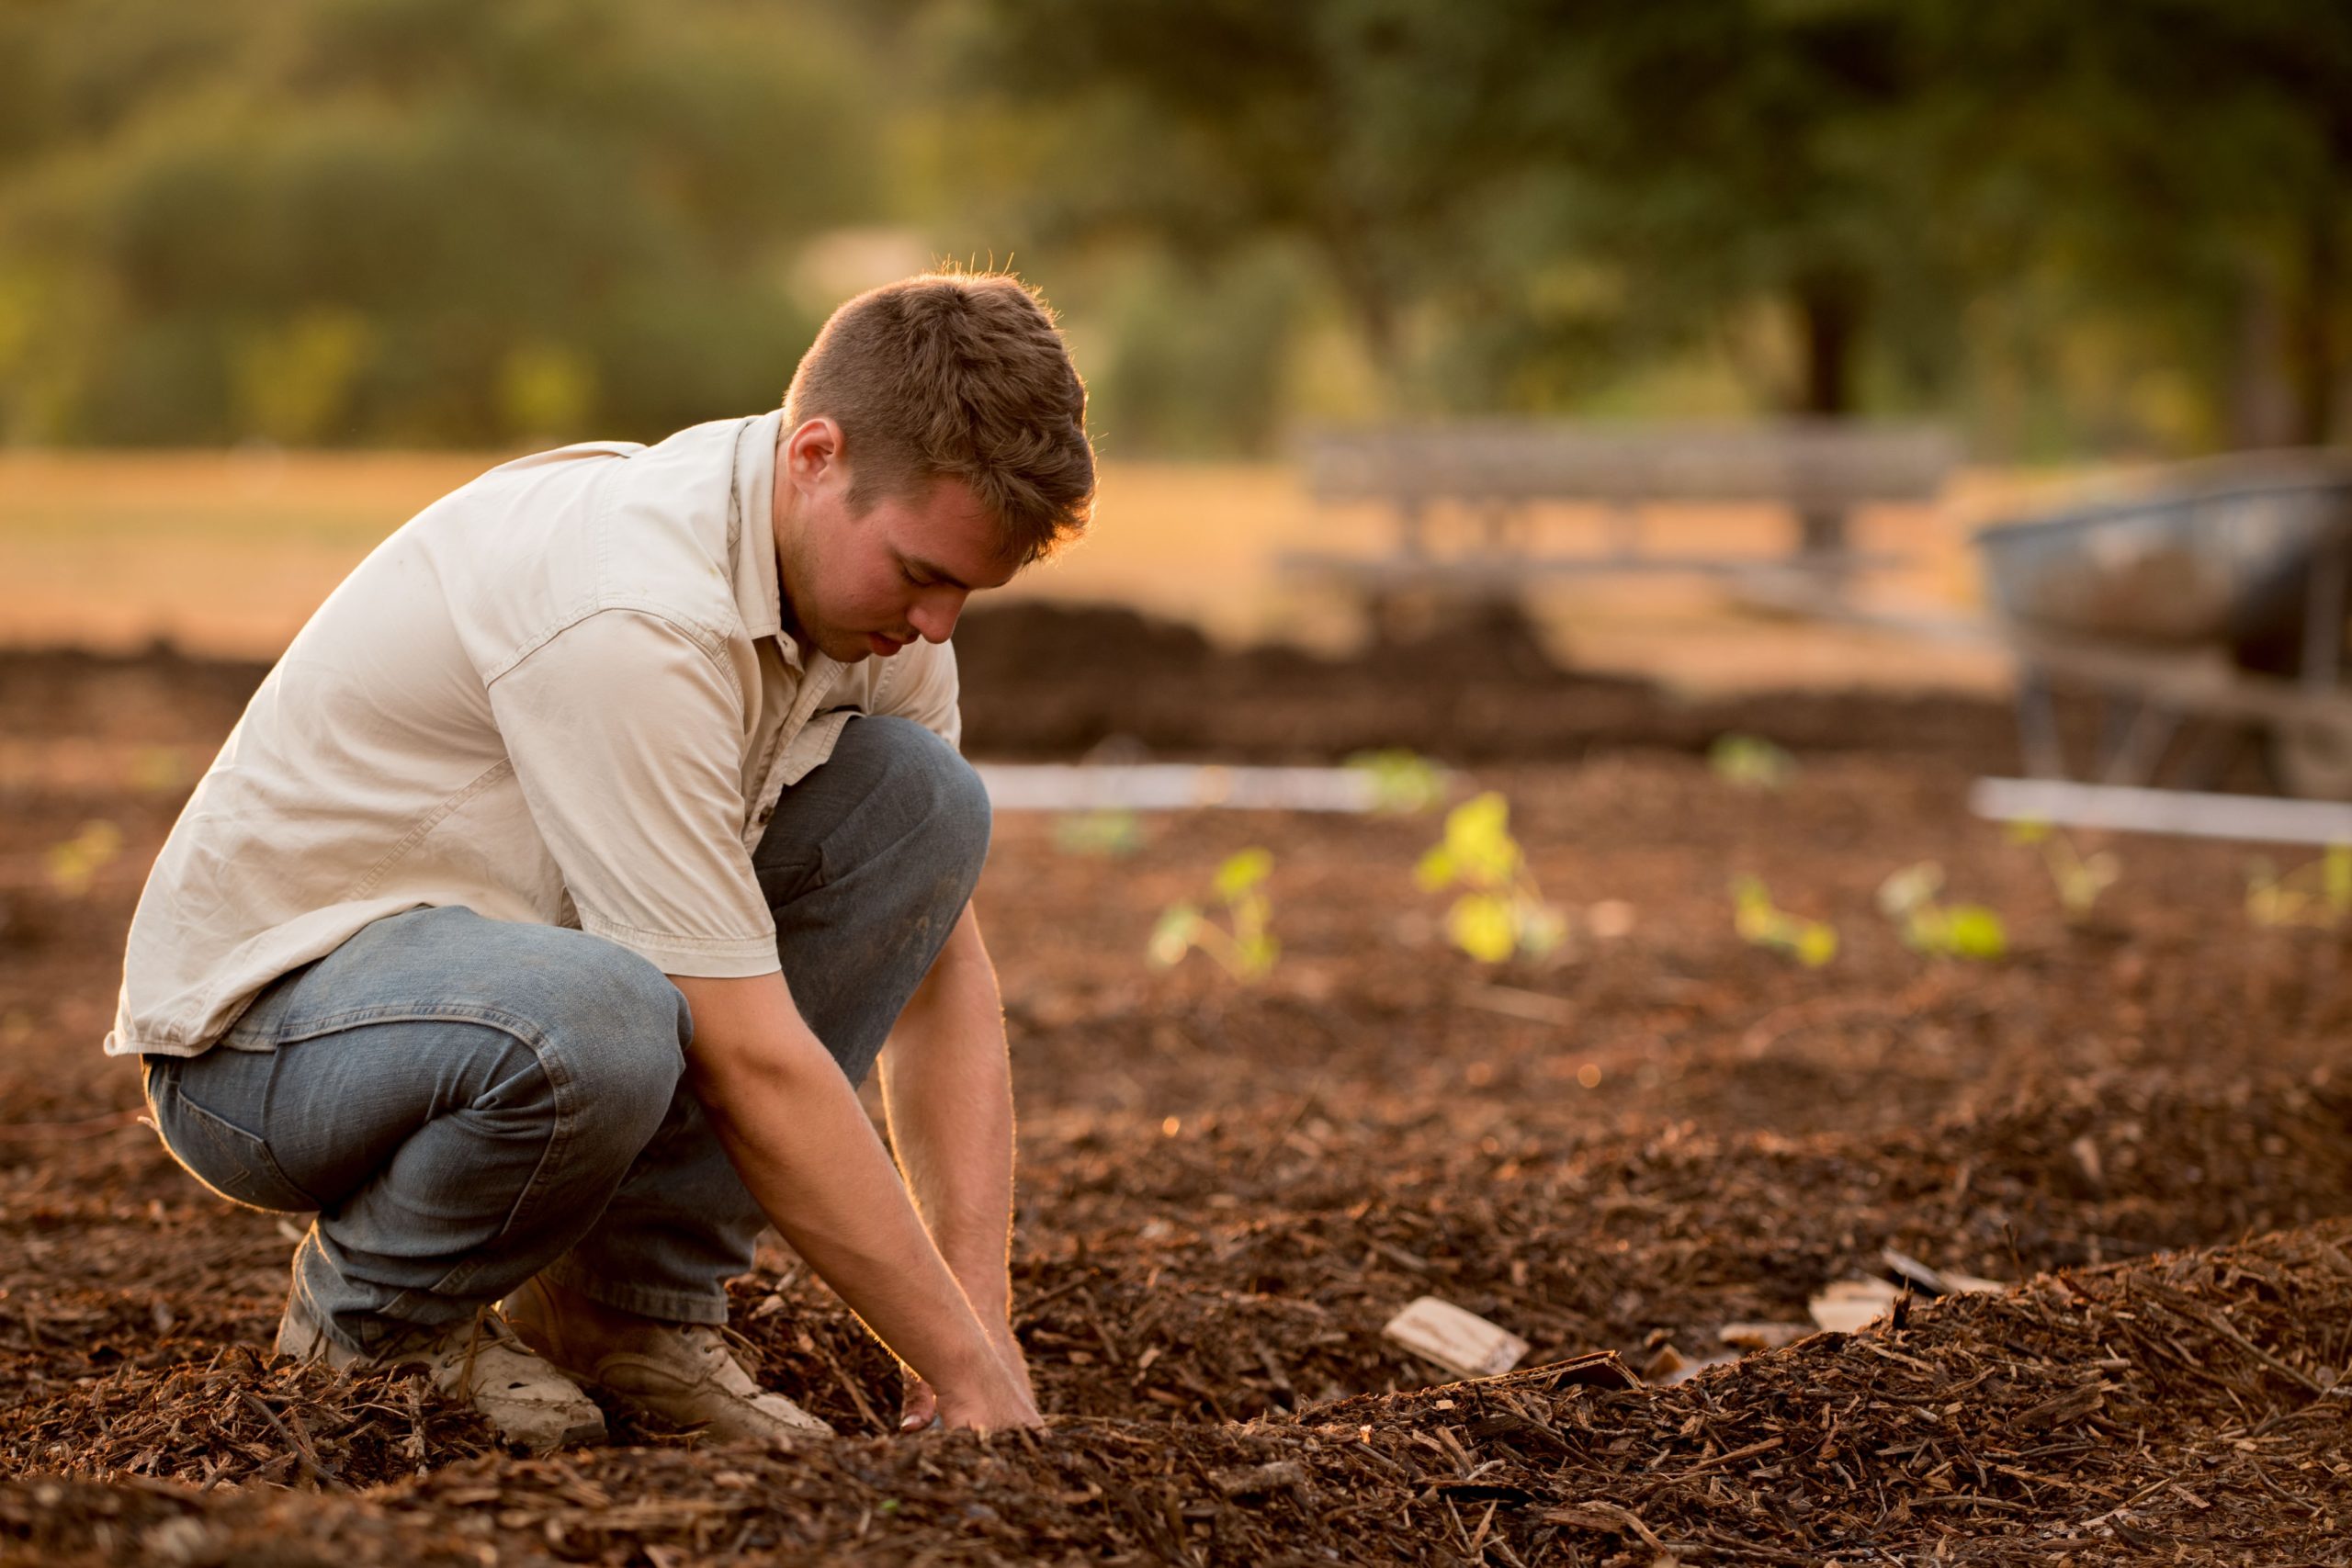 A man in a beige shirt planting seeds in a garden at sunset